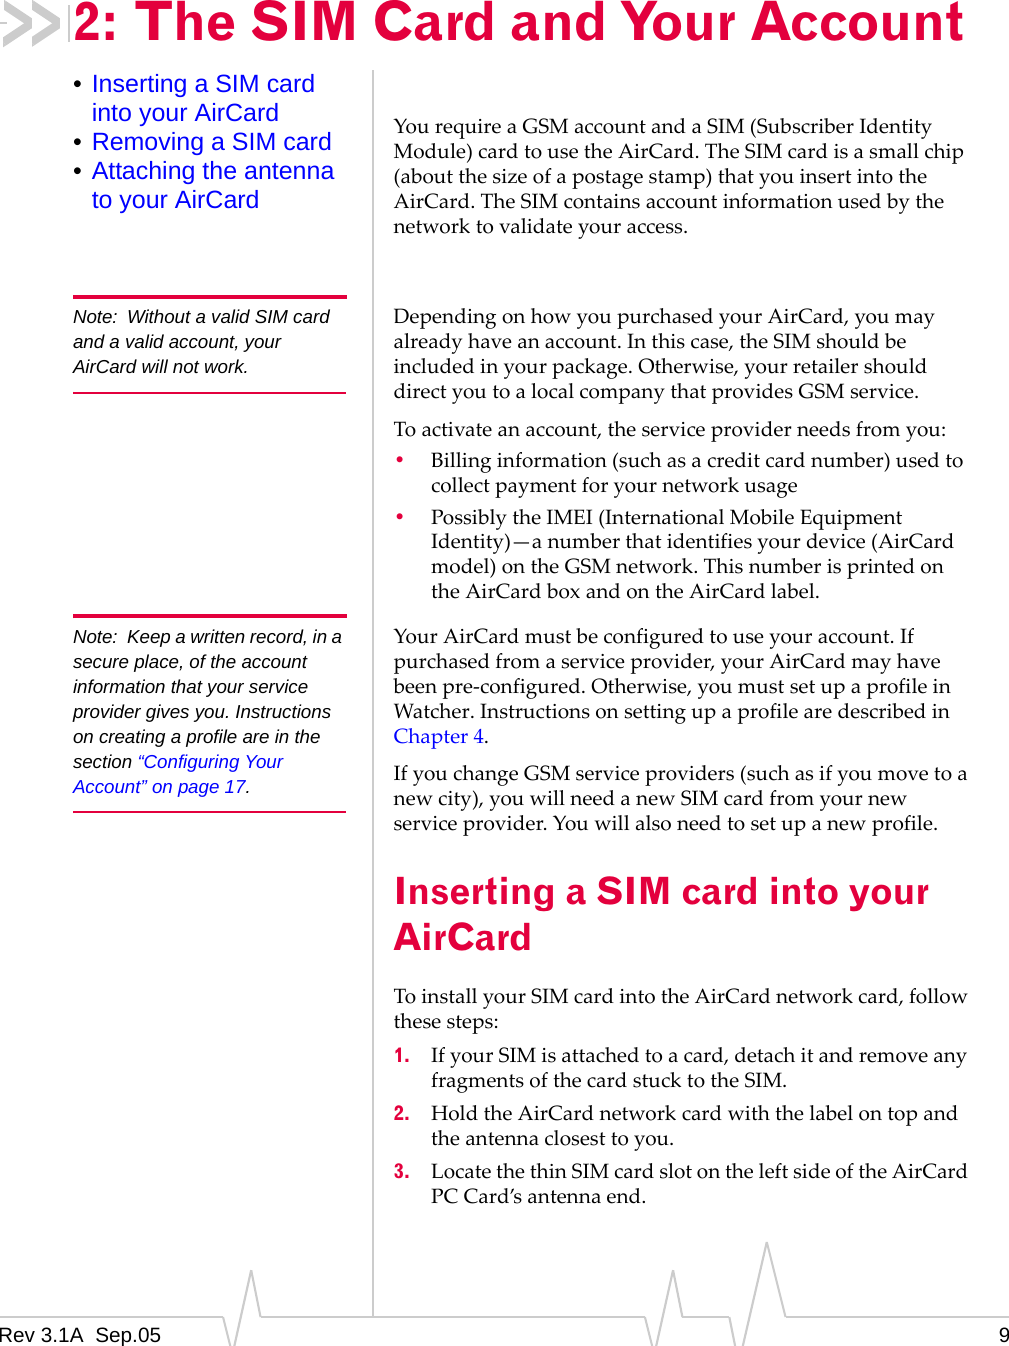 Rev 3.1A  Sep.05 92: The SIM Card and Your Account•Inserting a SIM card into your AirCard•Removing a SIM card•Attaching the antenna to your AirCardYou require a GSM account and a SIM (Subscriber Identity Module) card to use the AirCard. The SIM card is a small chip (about the size of a postage stamp) that you insert into the AirCard. The SIM contains account information used by the network to validate your access. Note: Without a valid SIM card and a valid account, your AirCard will not work.Depending on how you purchased your AirCard, you may already have an account. In this case, the SIM should be included in your package. Otherwise, your retailer should direct you to a local company that provides GSM service.To activate an account, the service provider needs from you:•Billing information (such as a credit card number) used to collect payment for your network usage•Possibly the IMEI (International Mobile Equipment Identity)—a number that identifies your device (AirCard model) on the GSM network. This number is printed on the AirCard box and on the AirCard label.Note: Keep a written record, in a secure place, of the account information that your service provider gives you. Instructions on creating a profile are in the section “Configuring Your Account” on page 17.Your AirCard must be configured to use your account. If purchased from a service provider, your AirCard may have been pre-configured. Otherwise, you must set up a profile in Watcher. Instructions on setting up a profile are described in Chapter 4.If you change GSM service providers (such as if you move to a new city), you will need a new SIM card from your new service provider. You will also need to set up a new profile.Inserting a SIM card into your AirCardTo install your SIM card into the AirCard network card, follow these steps:1. If your SIM is attached to a card, detach it and remove any fragments of the card stuck to the SIM.2. Hold the AirCard network card with the label on top and the antenna closest to you.3. Locate the thin SIM card slot on the left side of the AirCard PC Card’s antenna end.